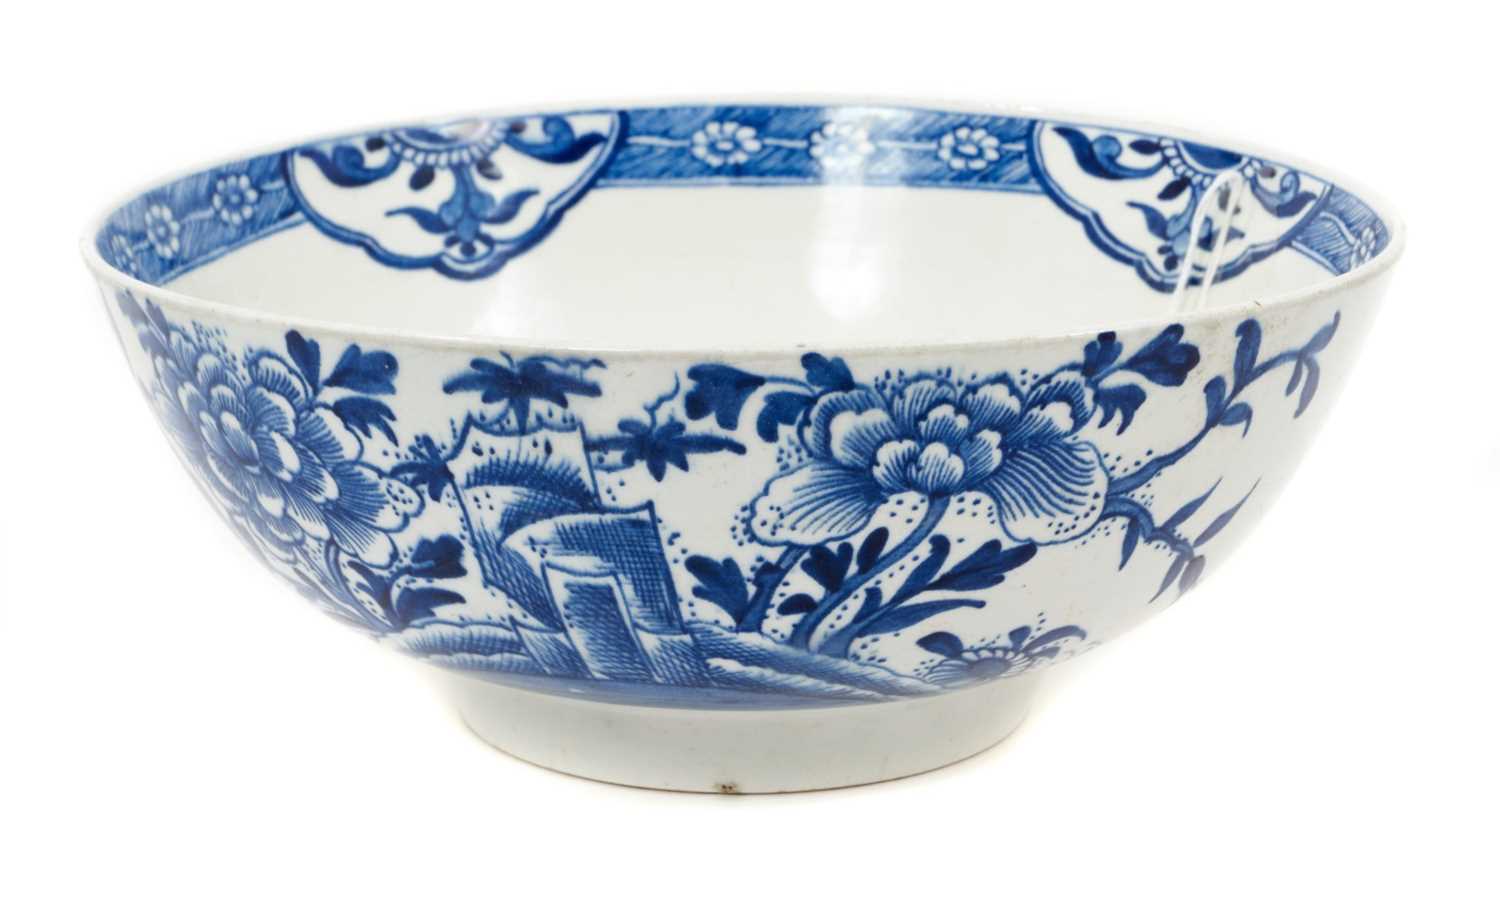 Lot 281 - An English porcelain round bowl, painted in blue, circa 1770, probably Bow